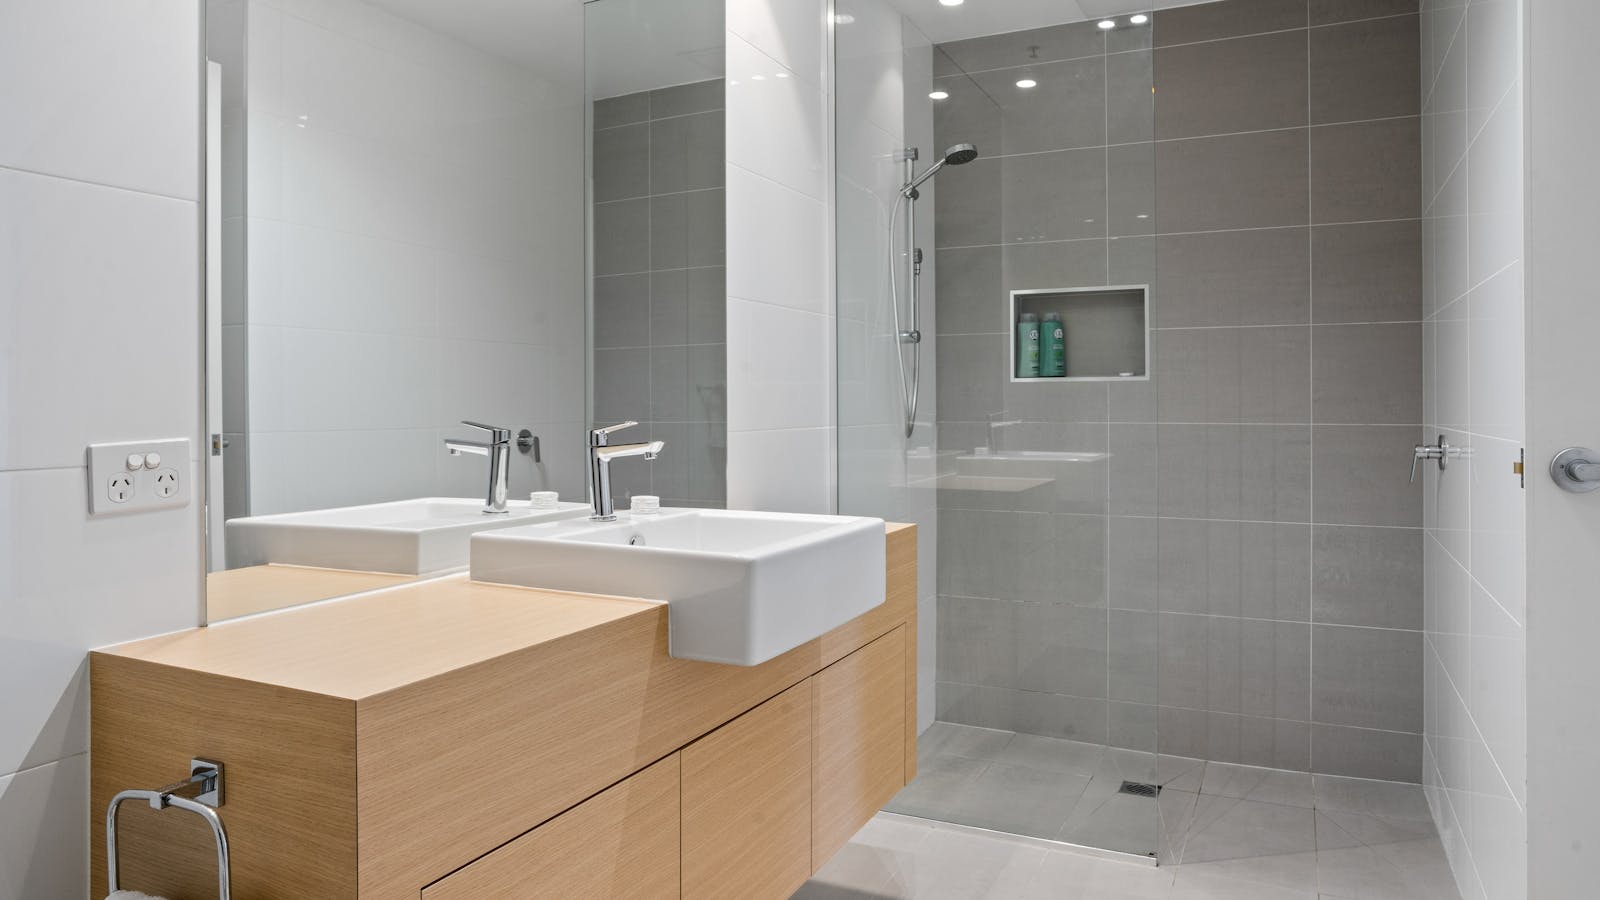 Spacious bathrooms with walk in showers